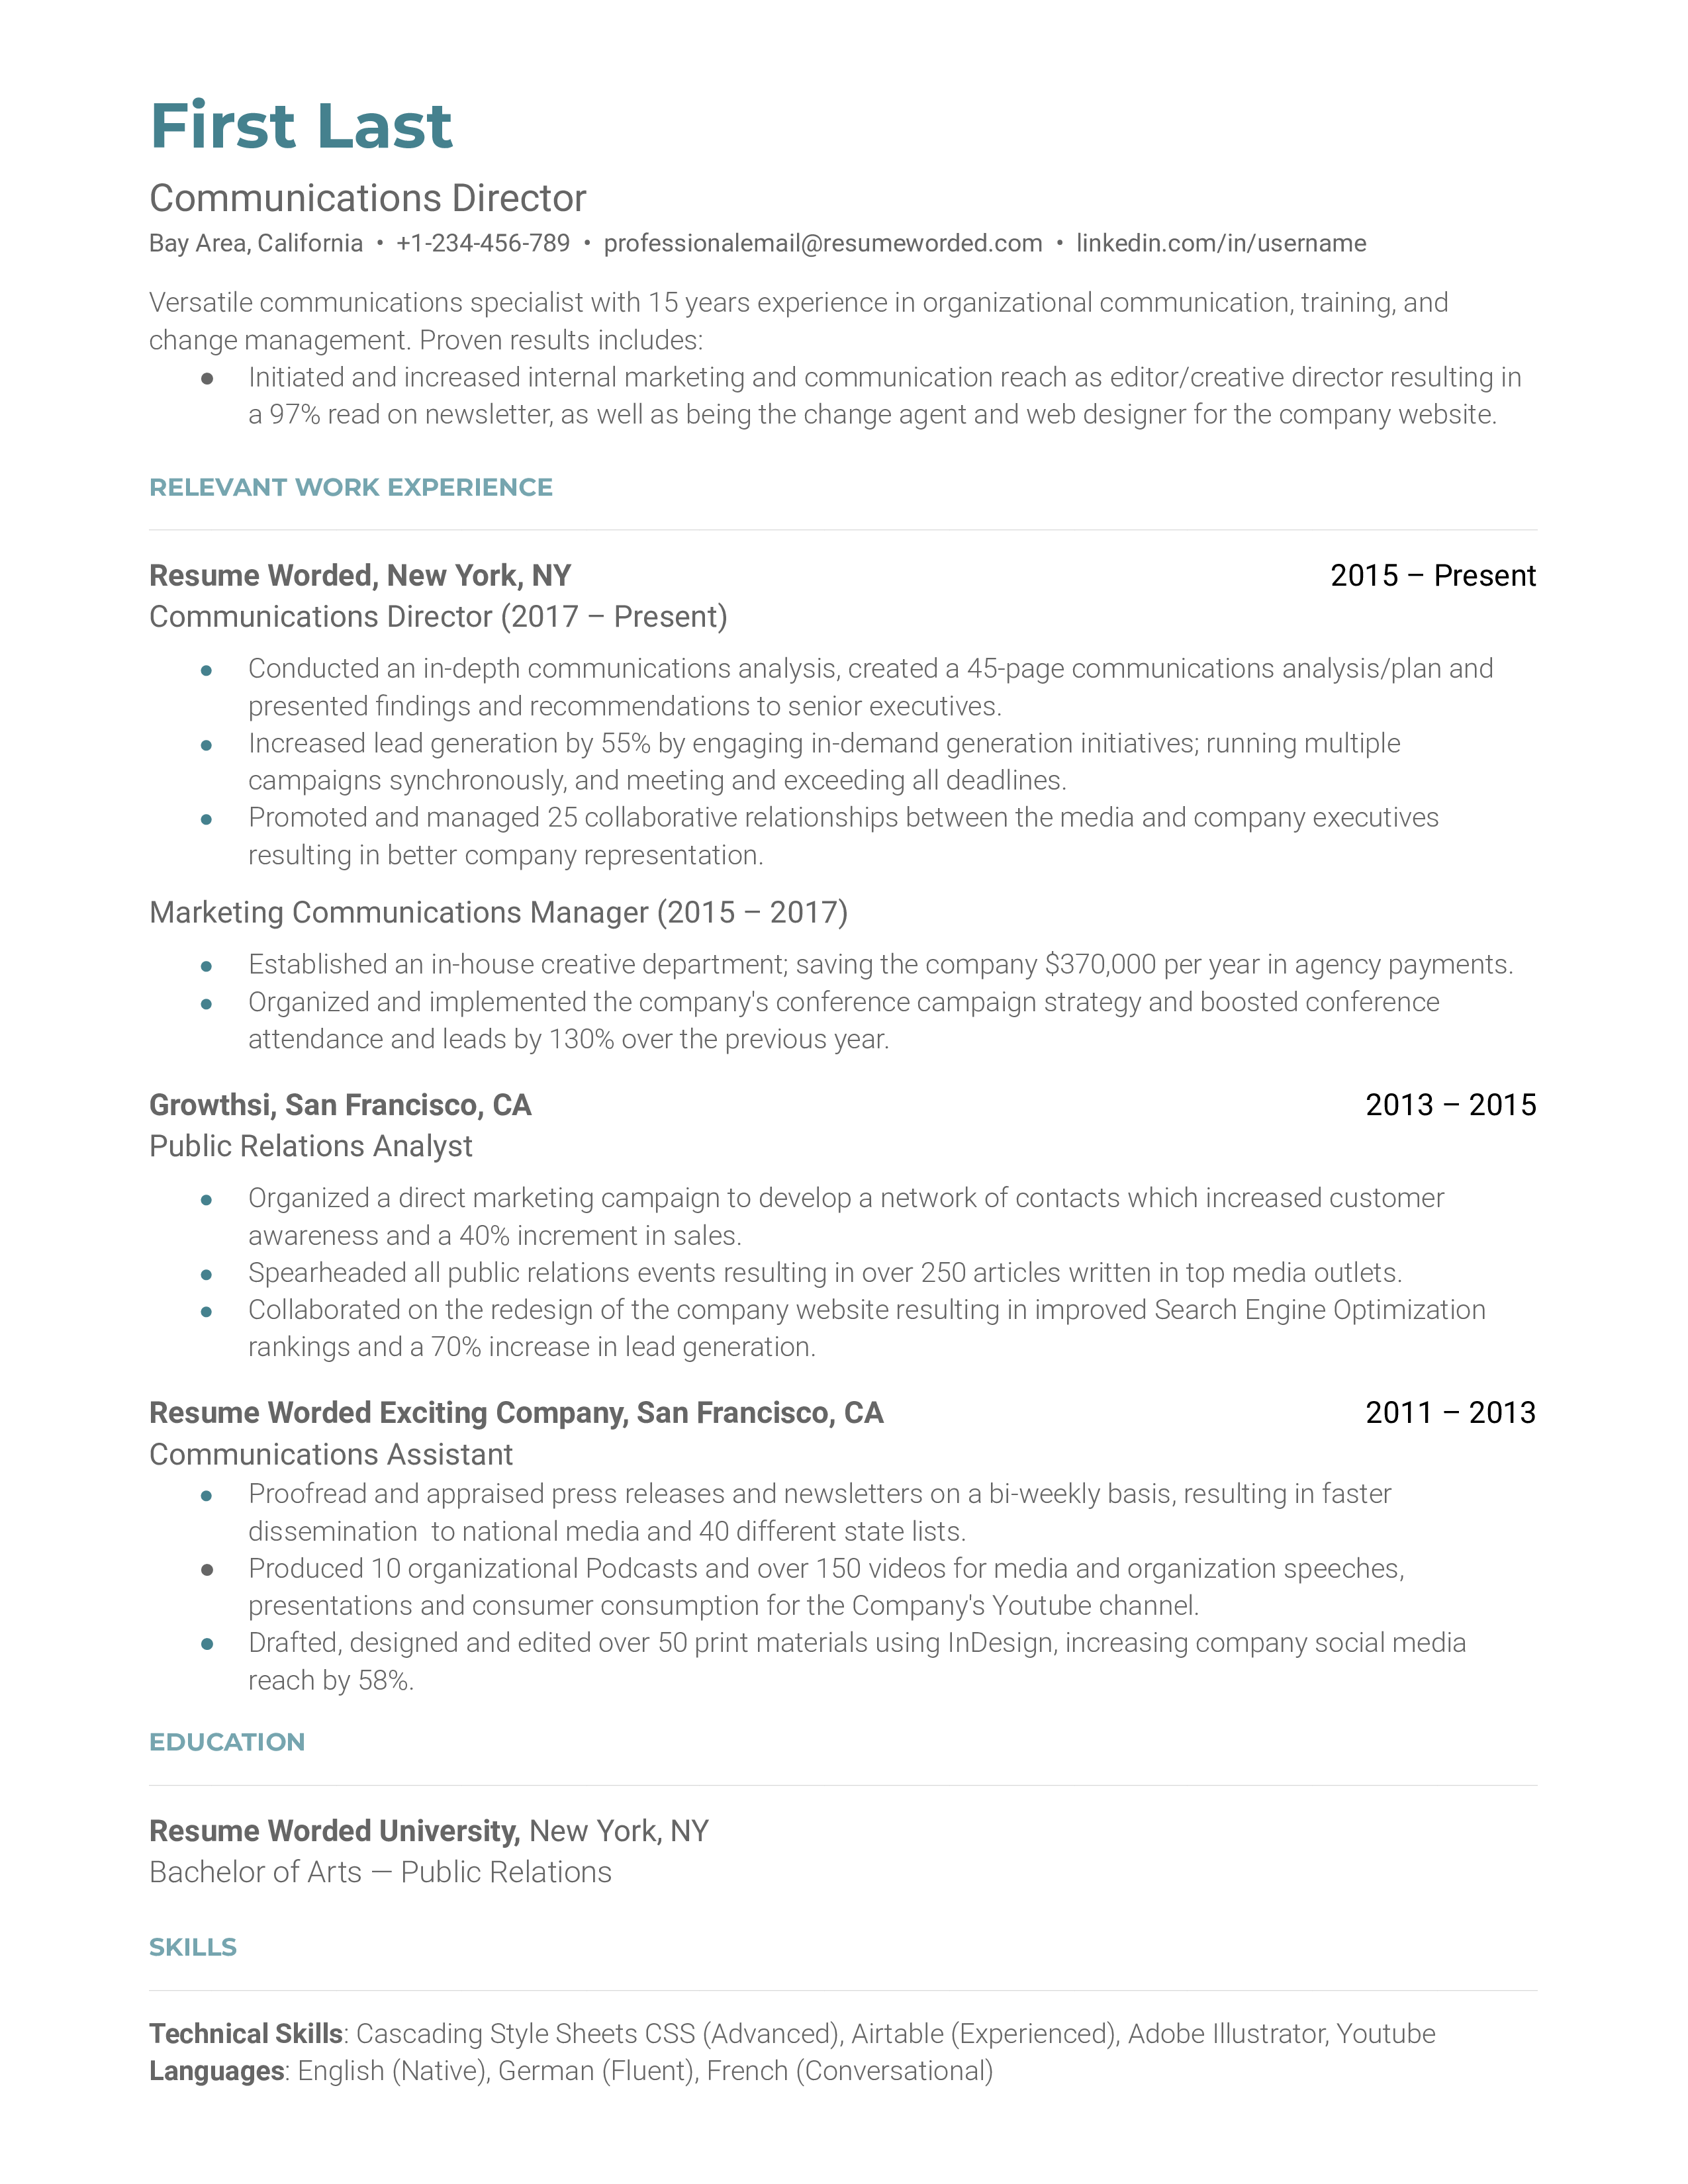 A well-organized CV for a Communications Director emphasizing crisis communication experience and digital proficiency.